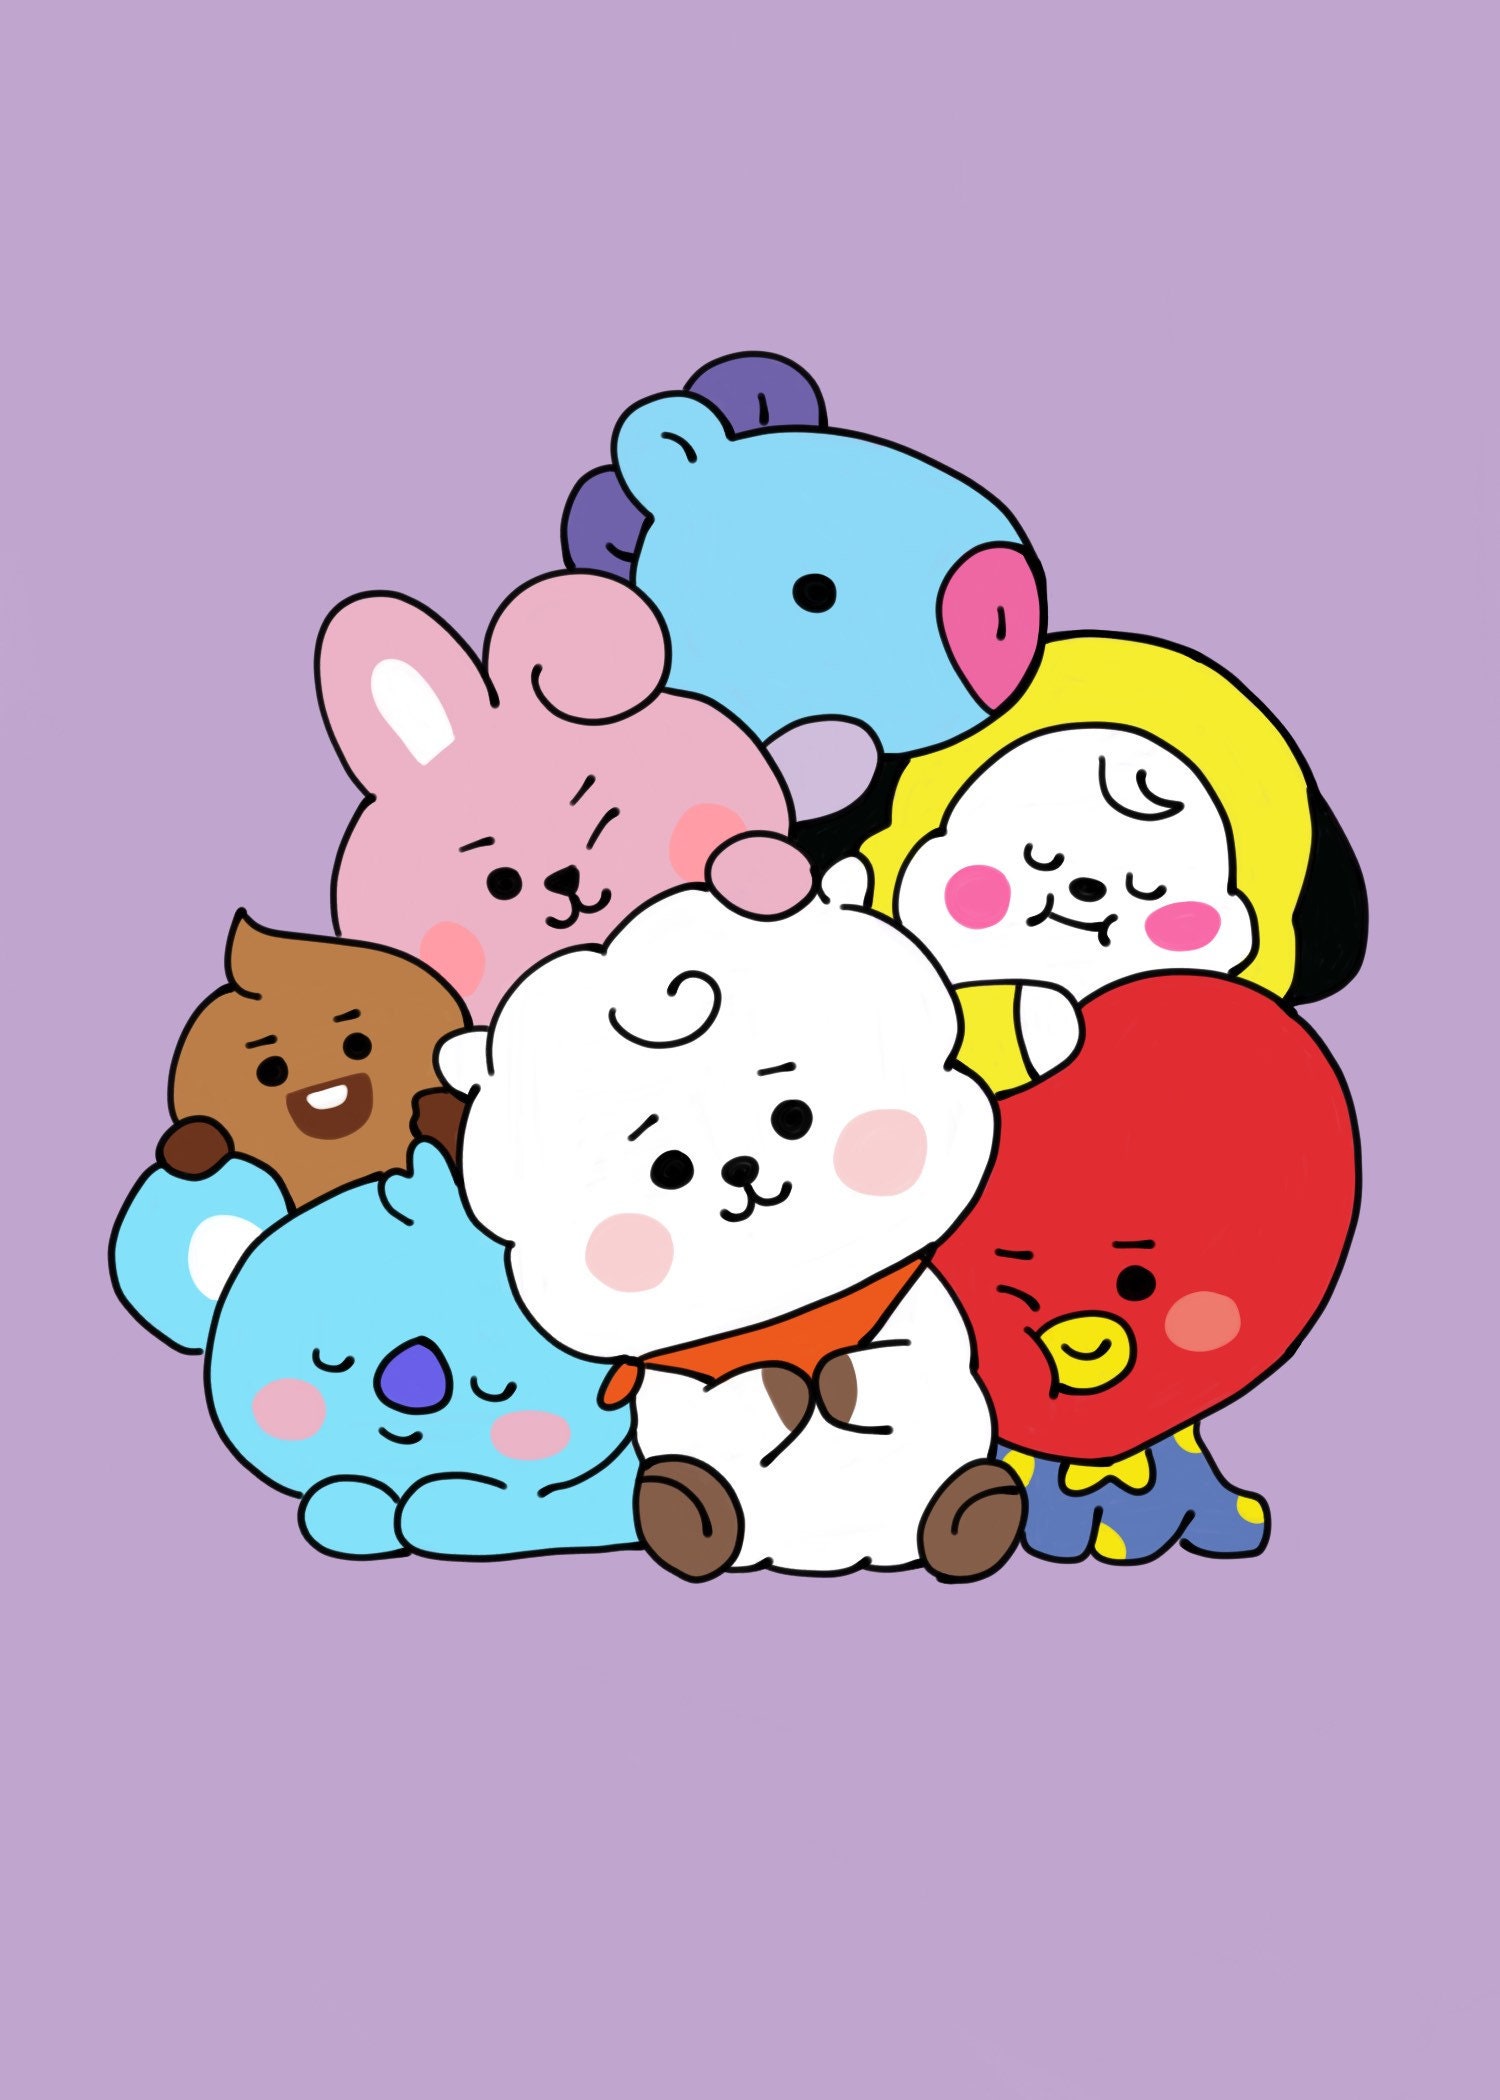 BTS/BT21 Member and Character Prints | Etsy